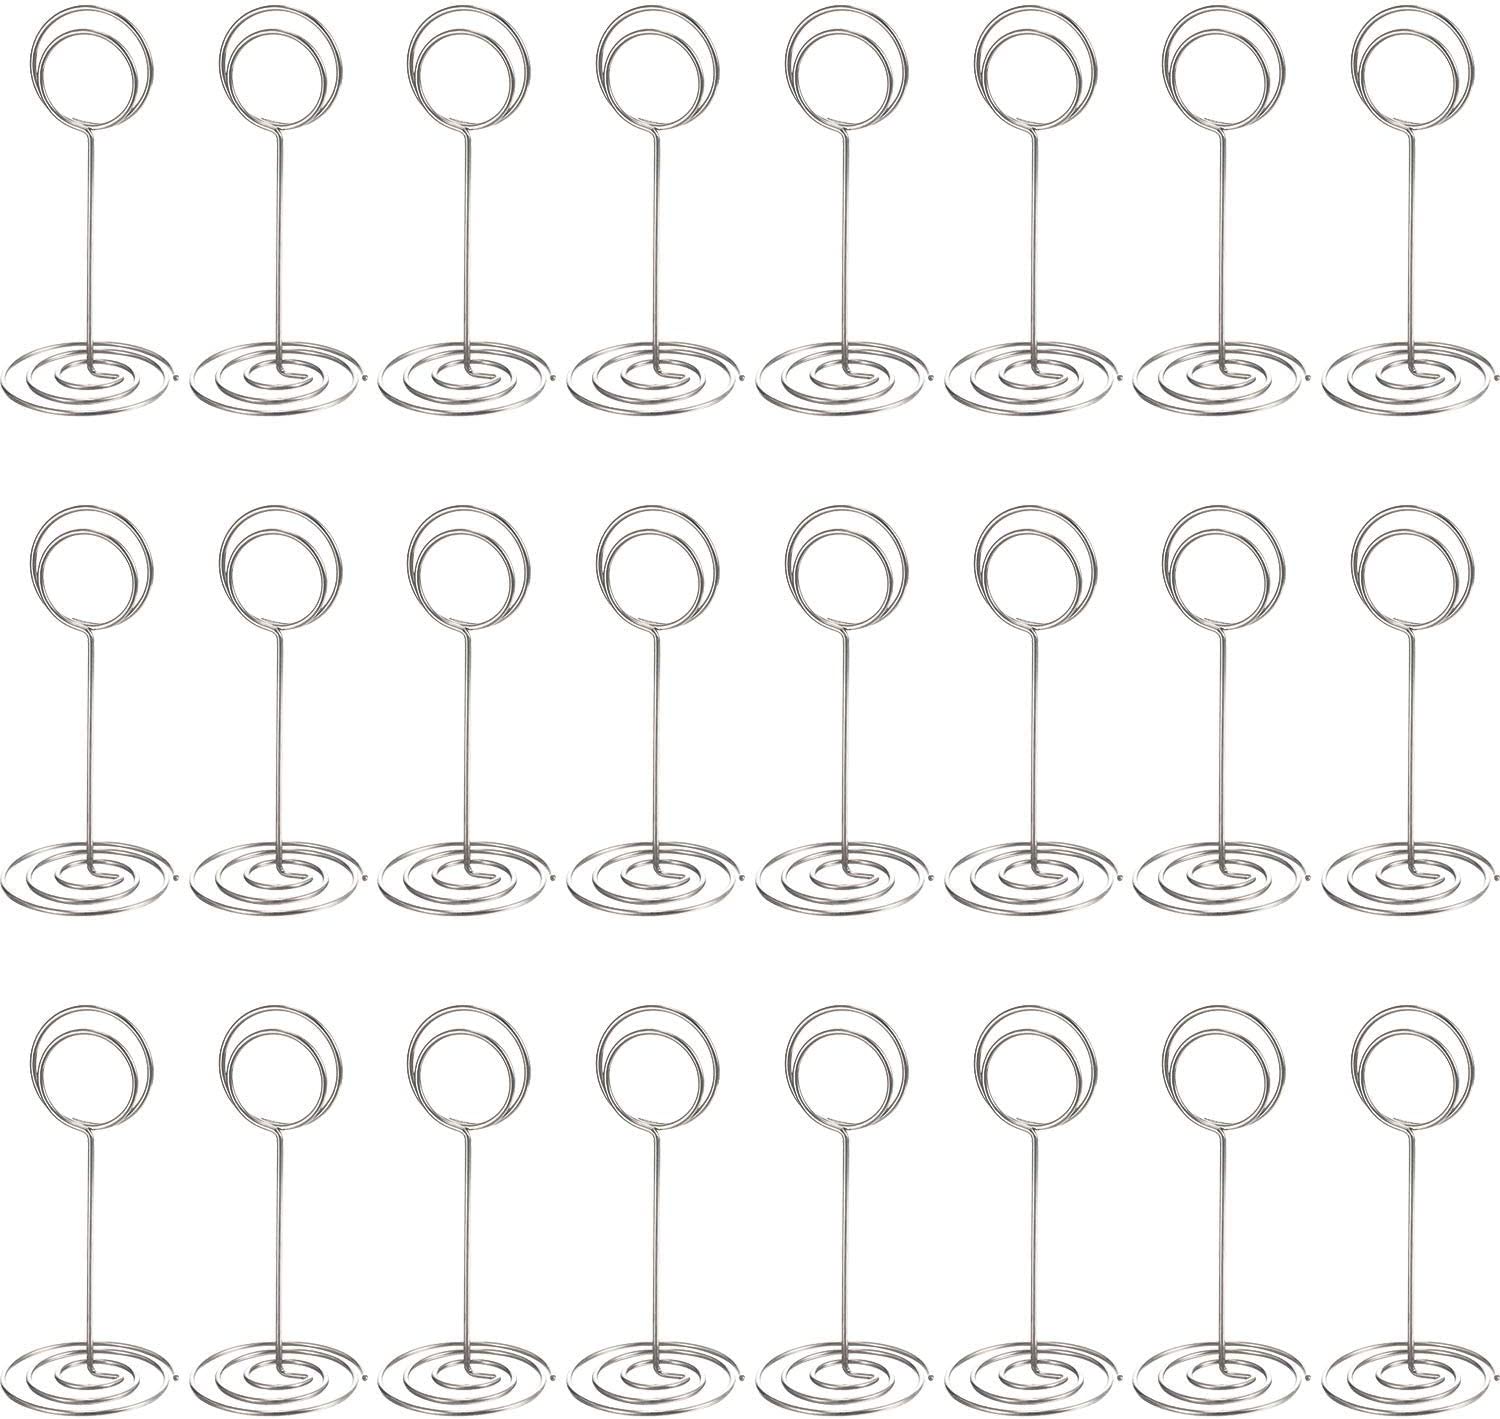 TecUnite Circle-Shaped Metal Wire Place Card Holders, 24-Count